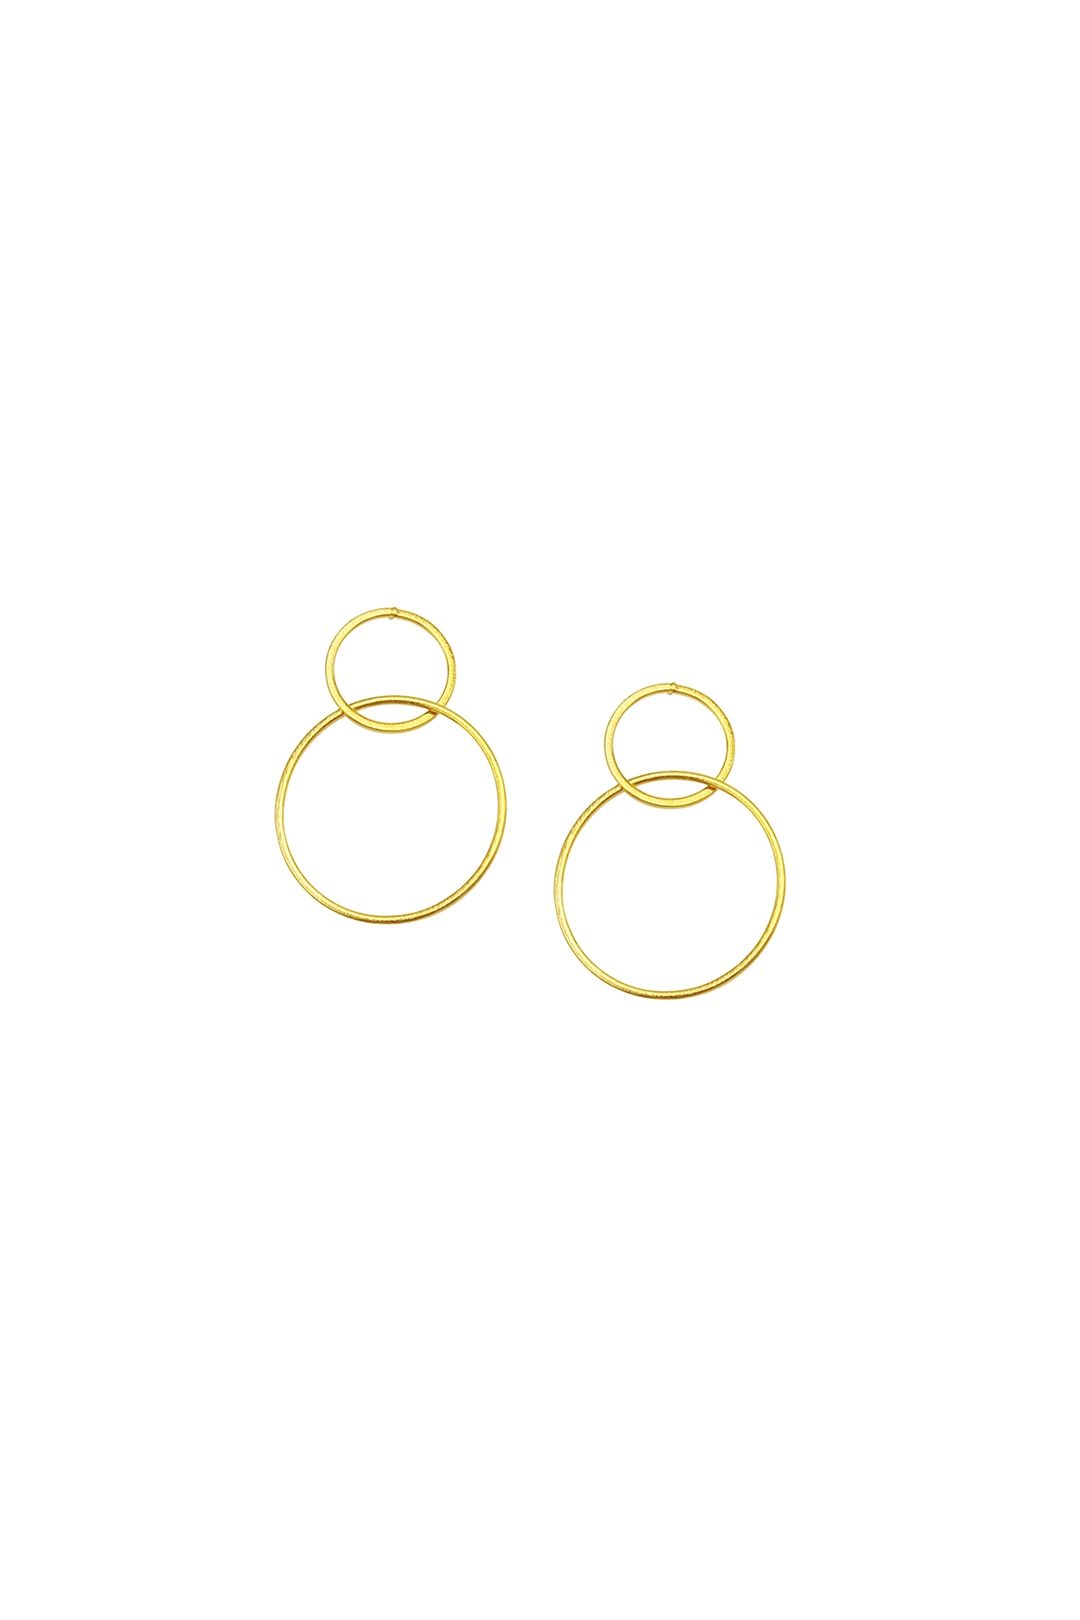 Jolie and Deen - Dale Earrings - Gold - Ghost Front